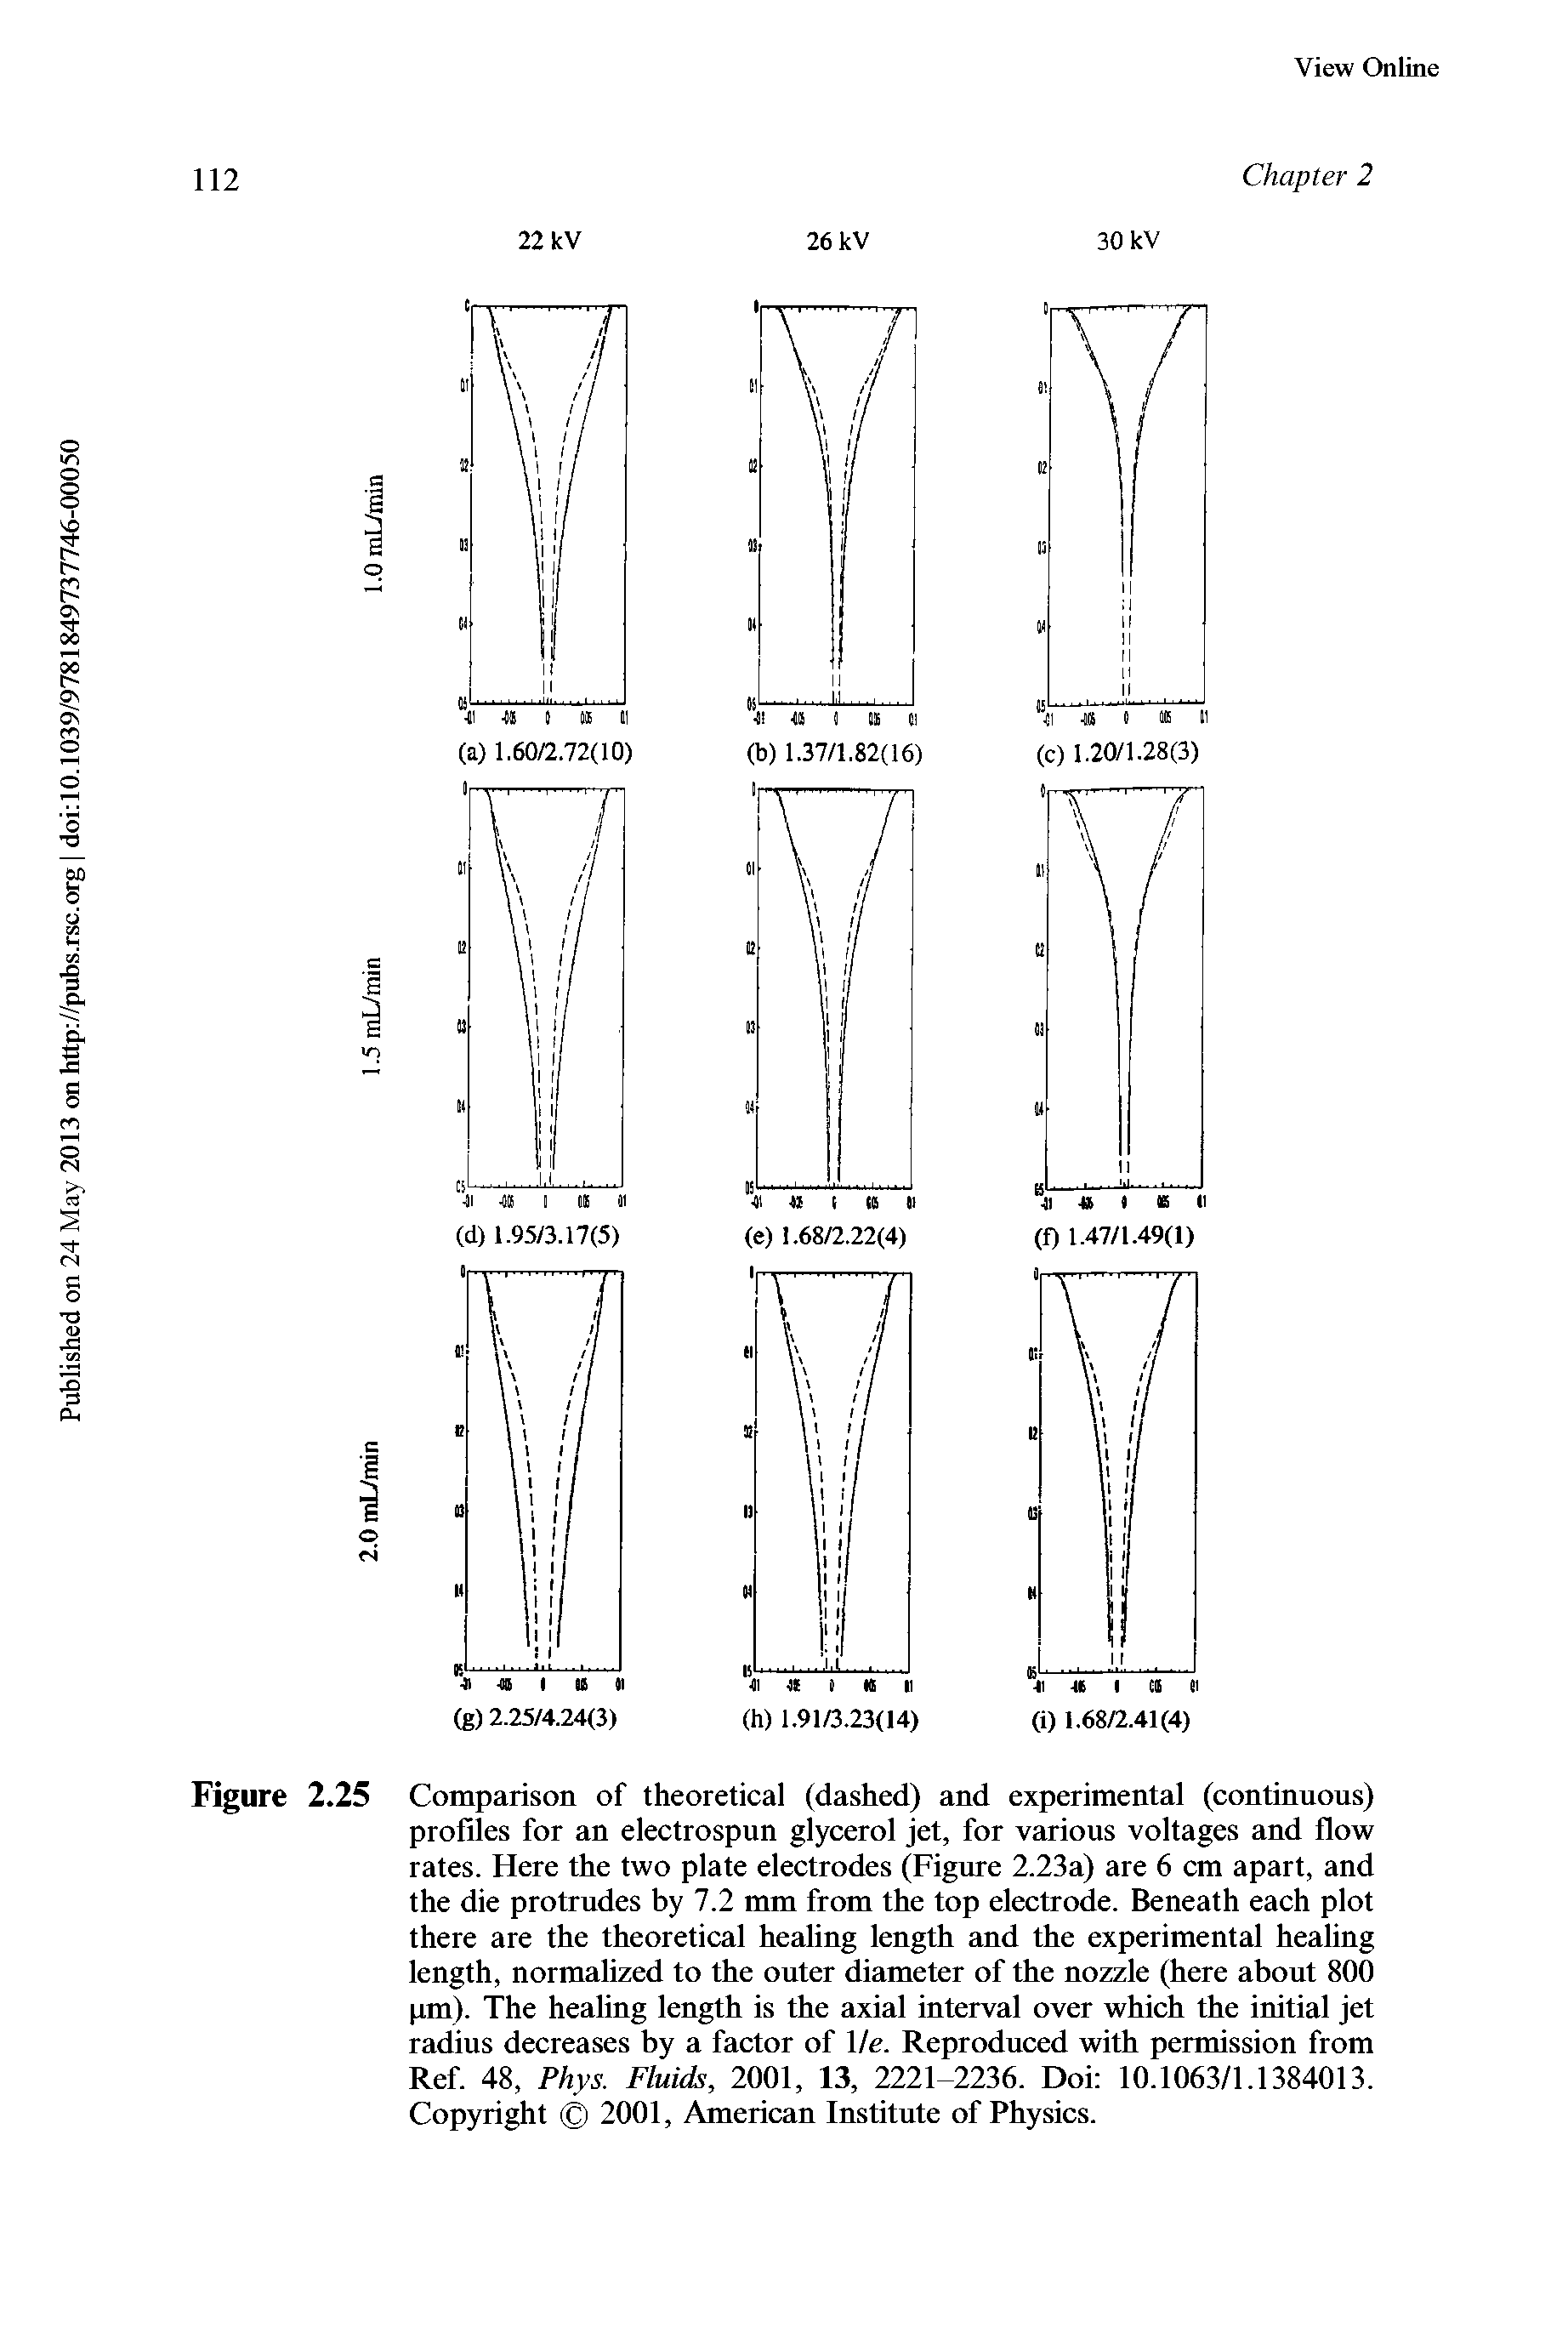 Figure 2.25 Comparison of theoretical (dashed) and experimental (continuous) profiles for an electrospun glycerol jet, for various voltages and flow rates. Here the two plate electrodes (Figure 2.23a) are 6 cm apart, and the die protrudes by 7.2 mm from the top electrode. Beneath each plot there are the theoretical healing length and the experimental healing length, normalized to the outer diameter of the nozzle (here about 800 pm). The healing length is the axial interval over which the initial jet radius decreases by a factor of lie. Reproduced with permission from Ref. 48, Phys. Fluids, 2001, 13, 2221-2236. Doi 10.1063/1.1384013. Copyright 2001, American Institute of Physics.